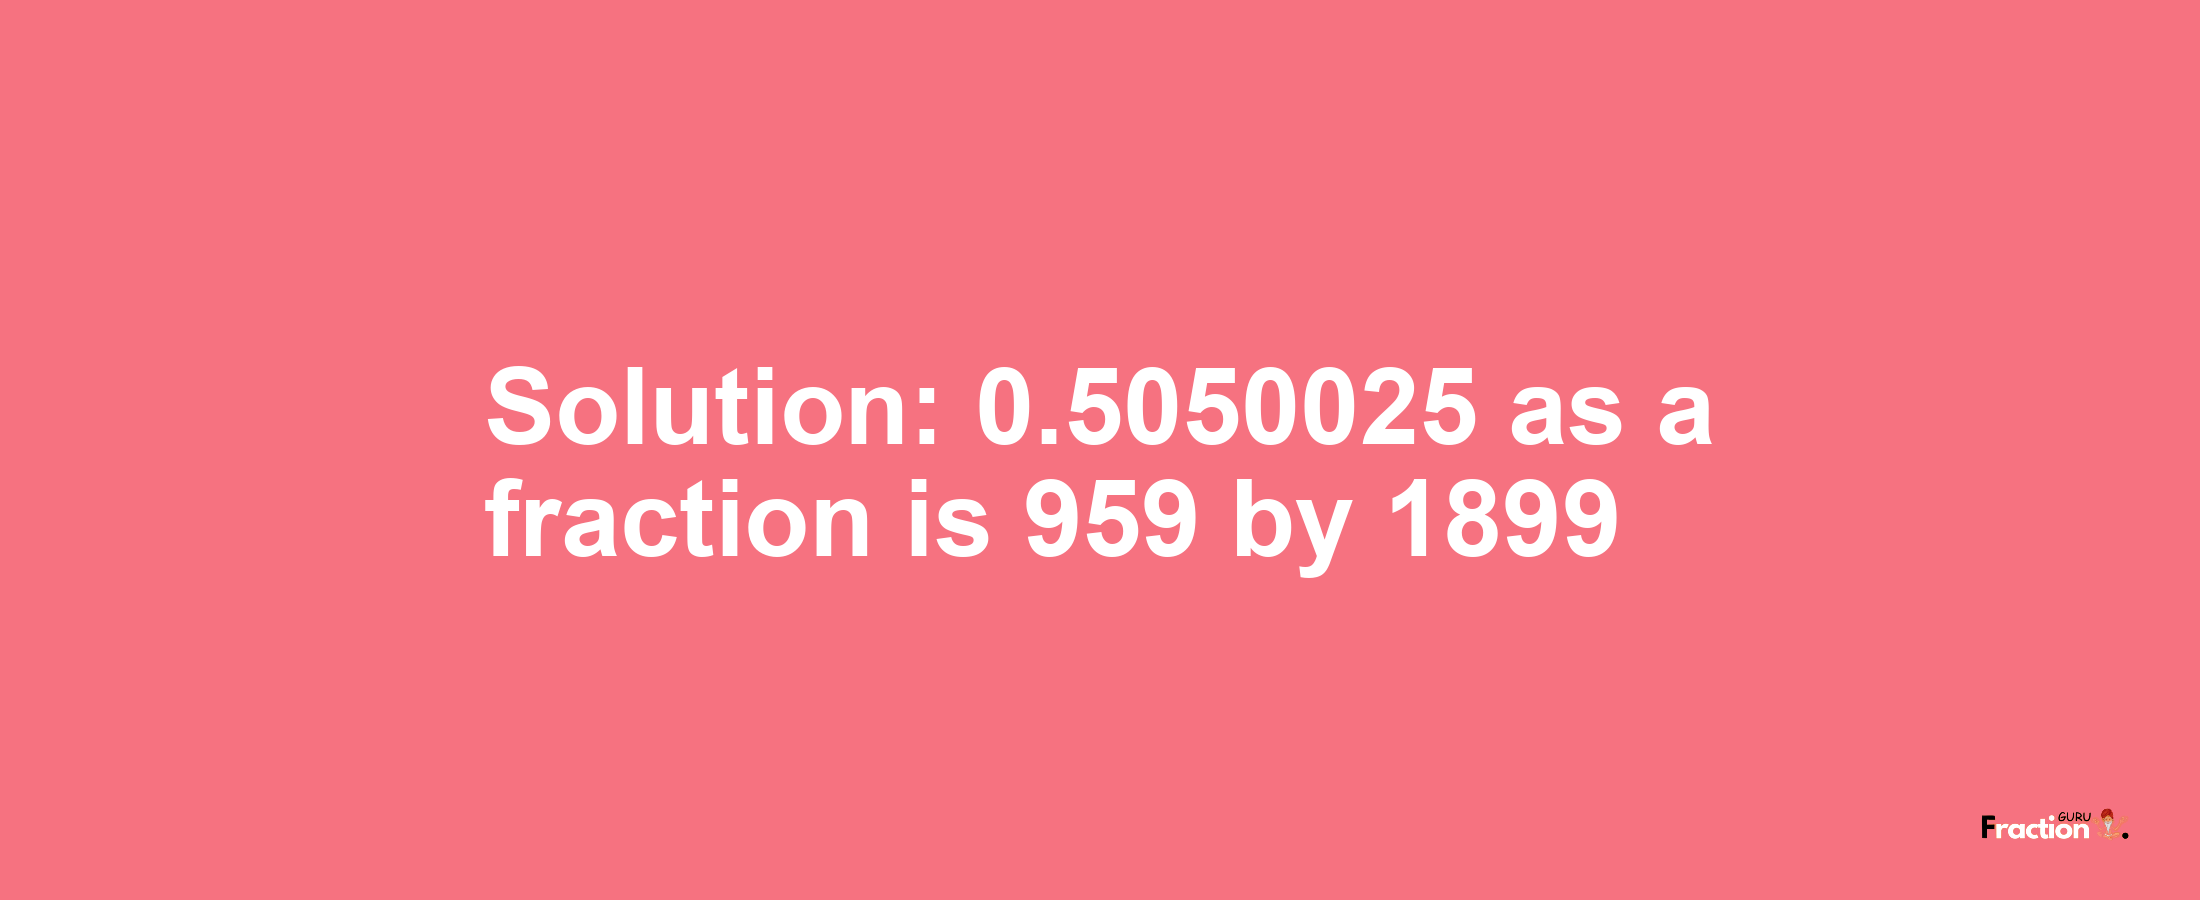 Solution:0.5050025 as a fraction is 959/1899